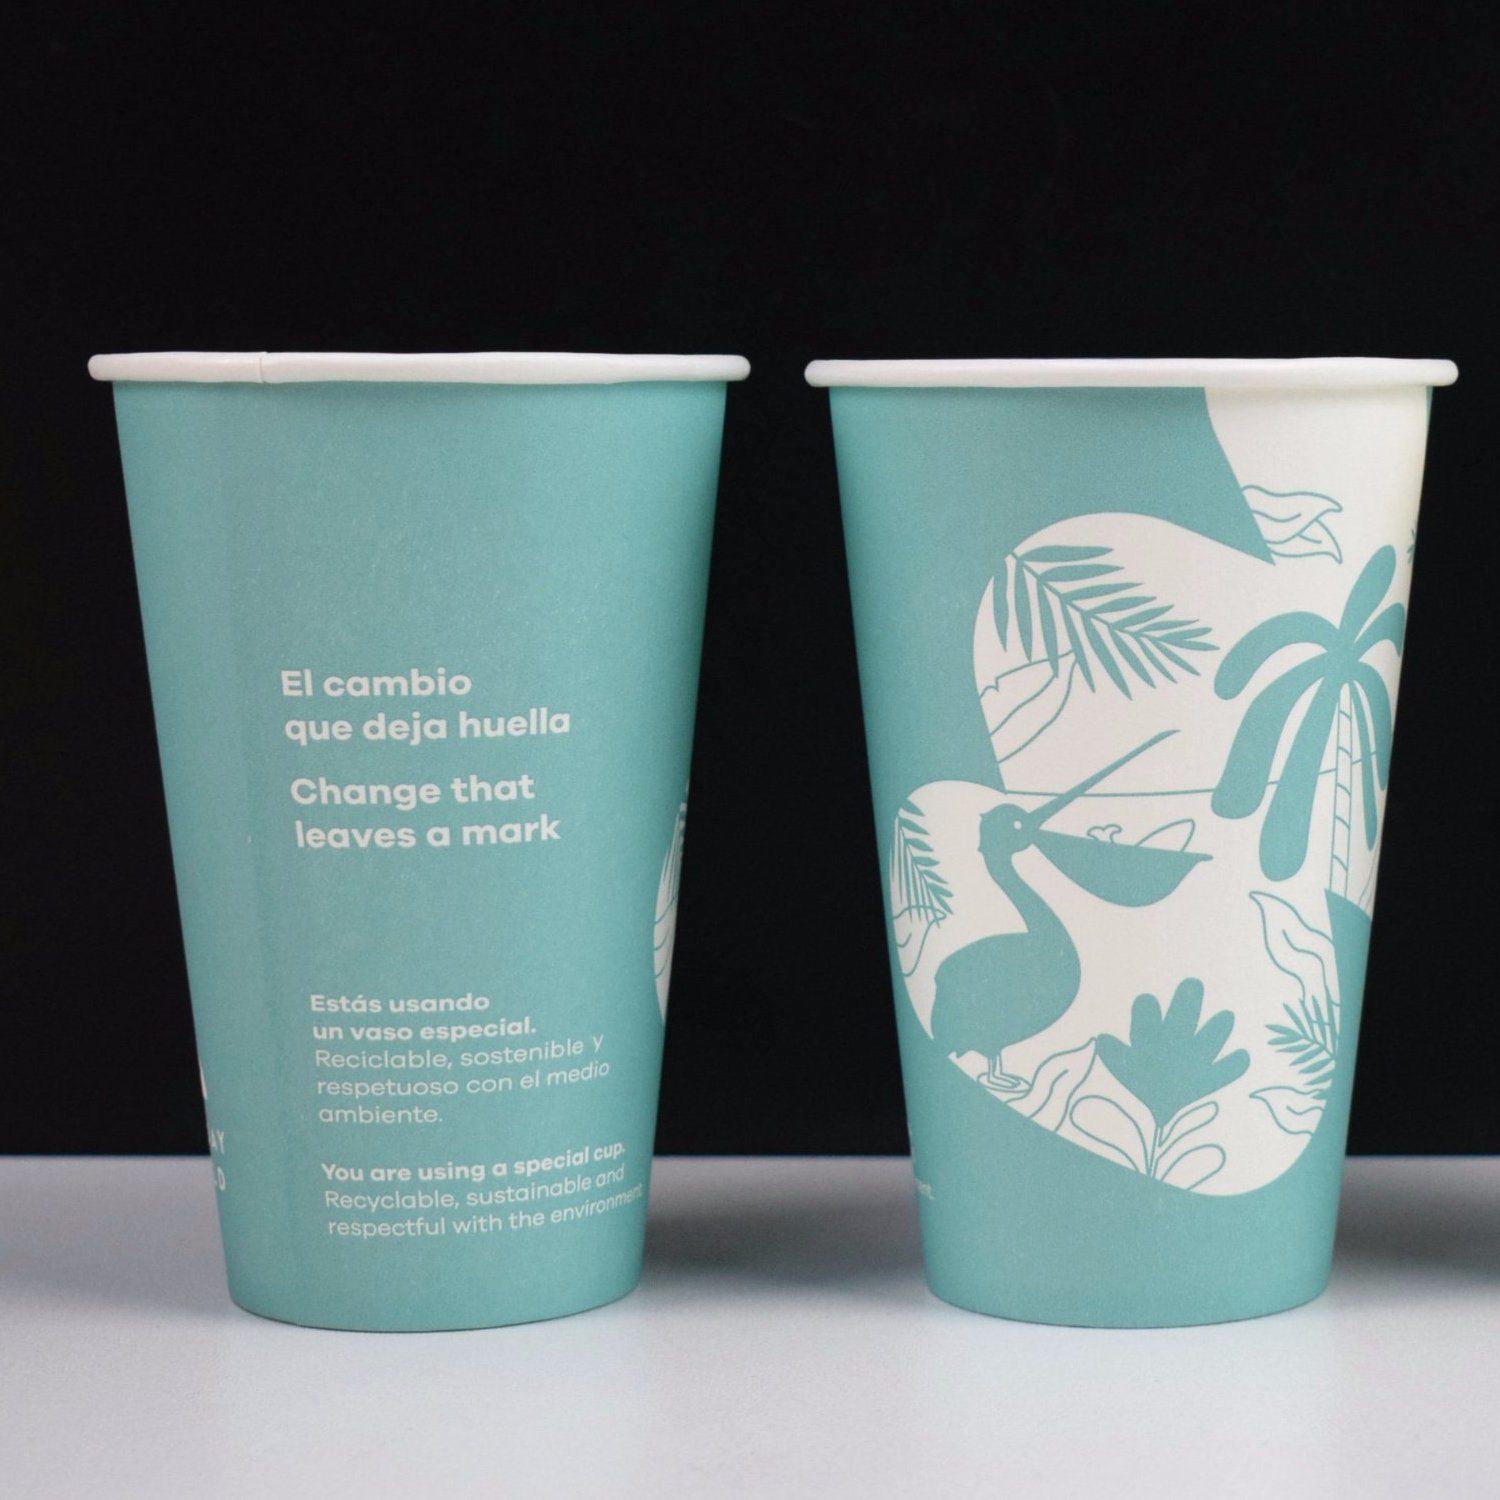 Wholesale Coffee Cup Tea Cup Paper Cup from China Factory